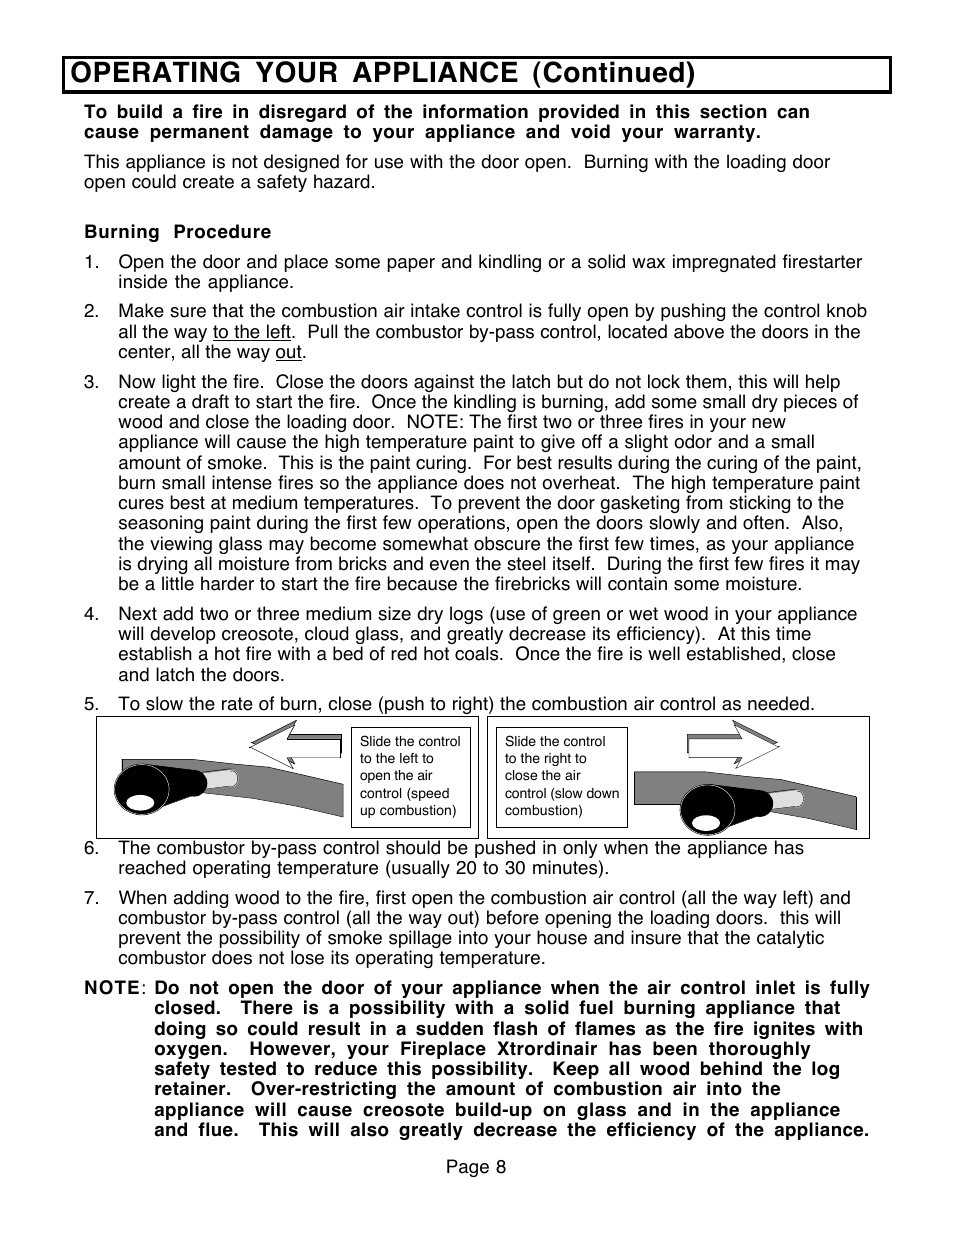 Operating your appliance (continued) | FireplaceXtrordinair 36A-BI User Manual | Page 8 / 30